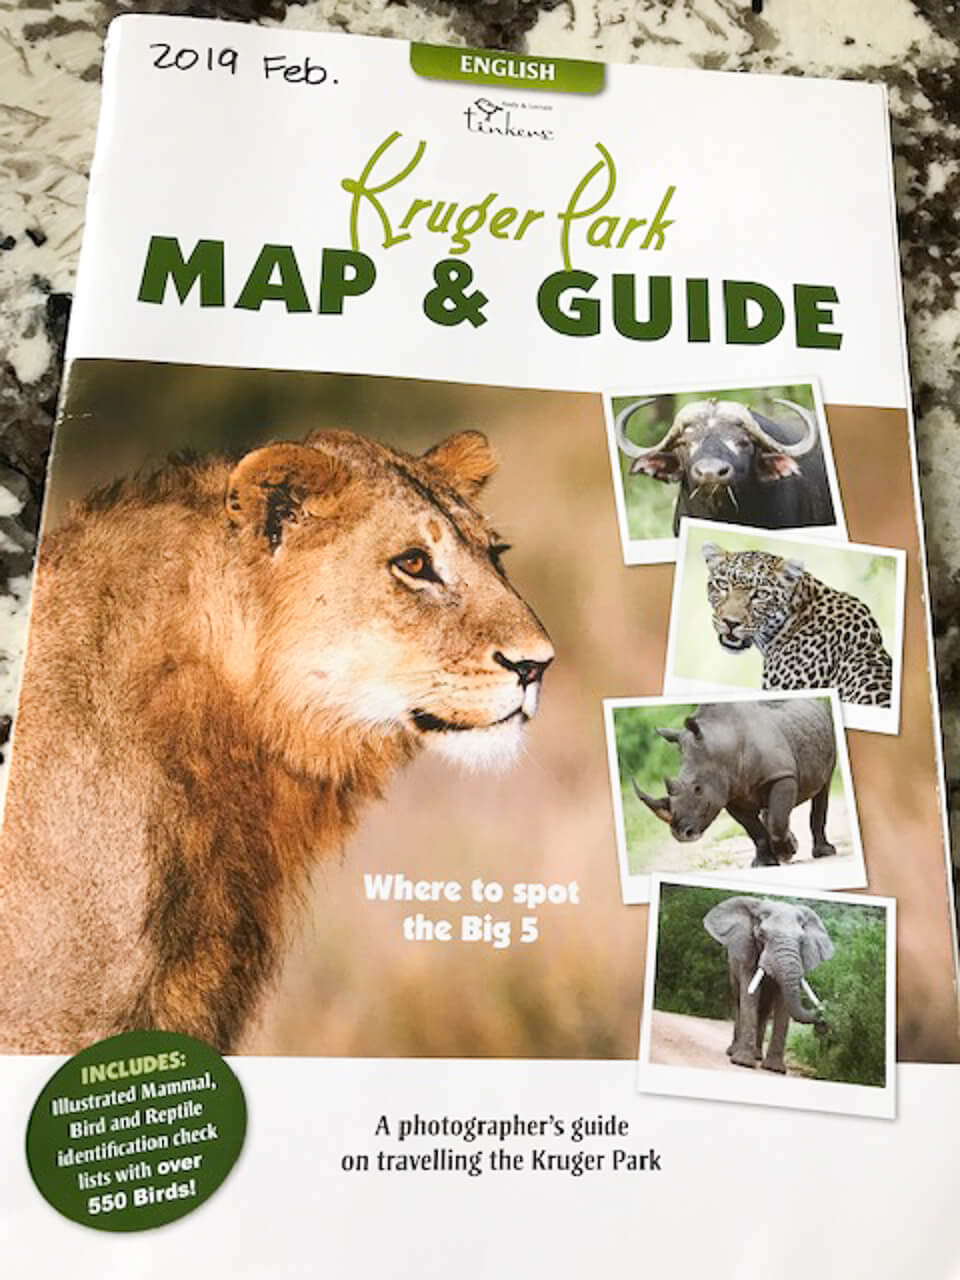 Kruger Park map and guide cover.